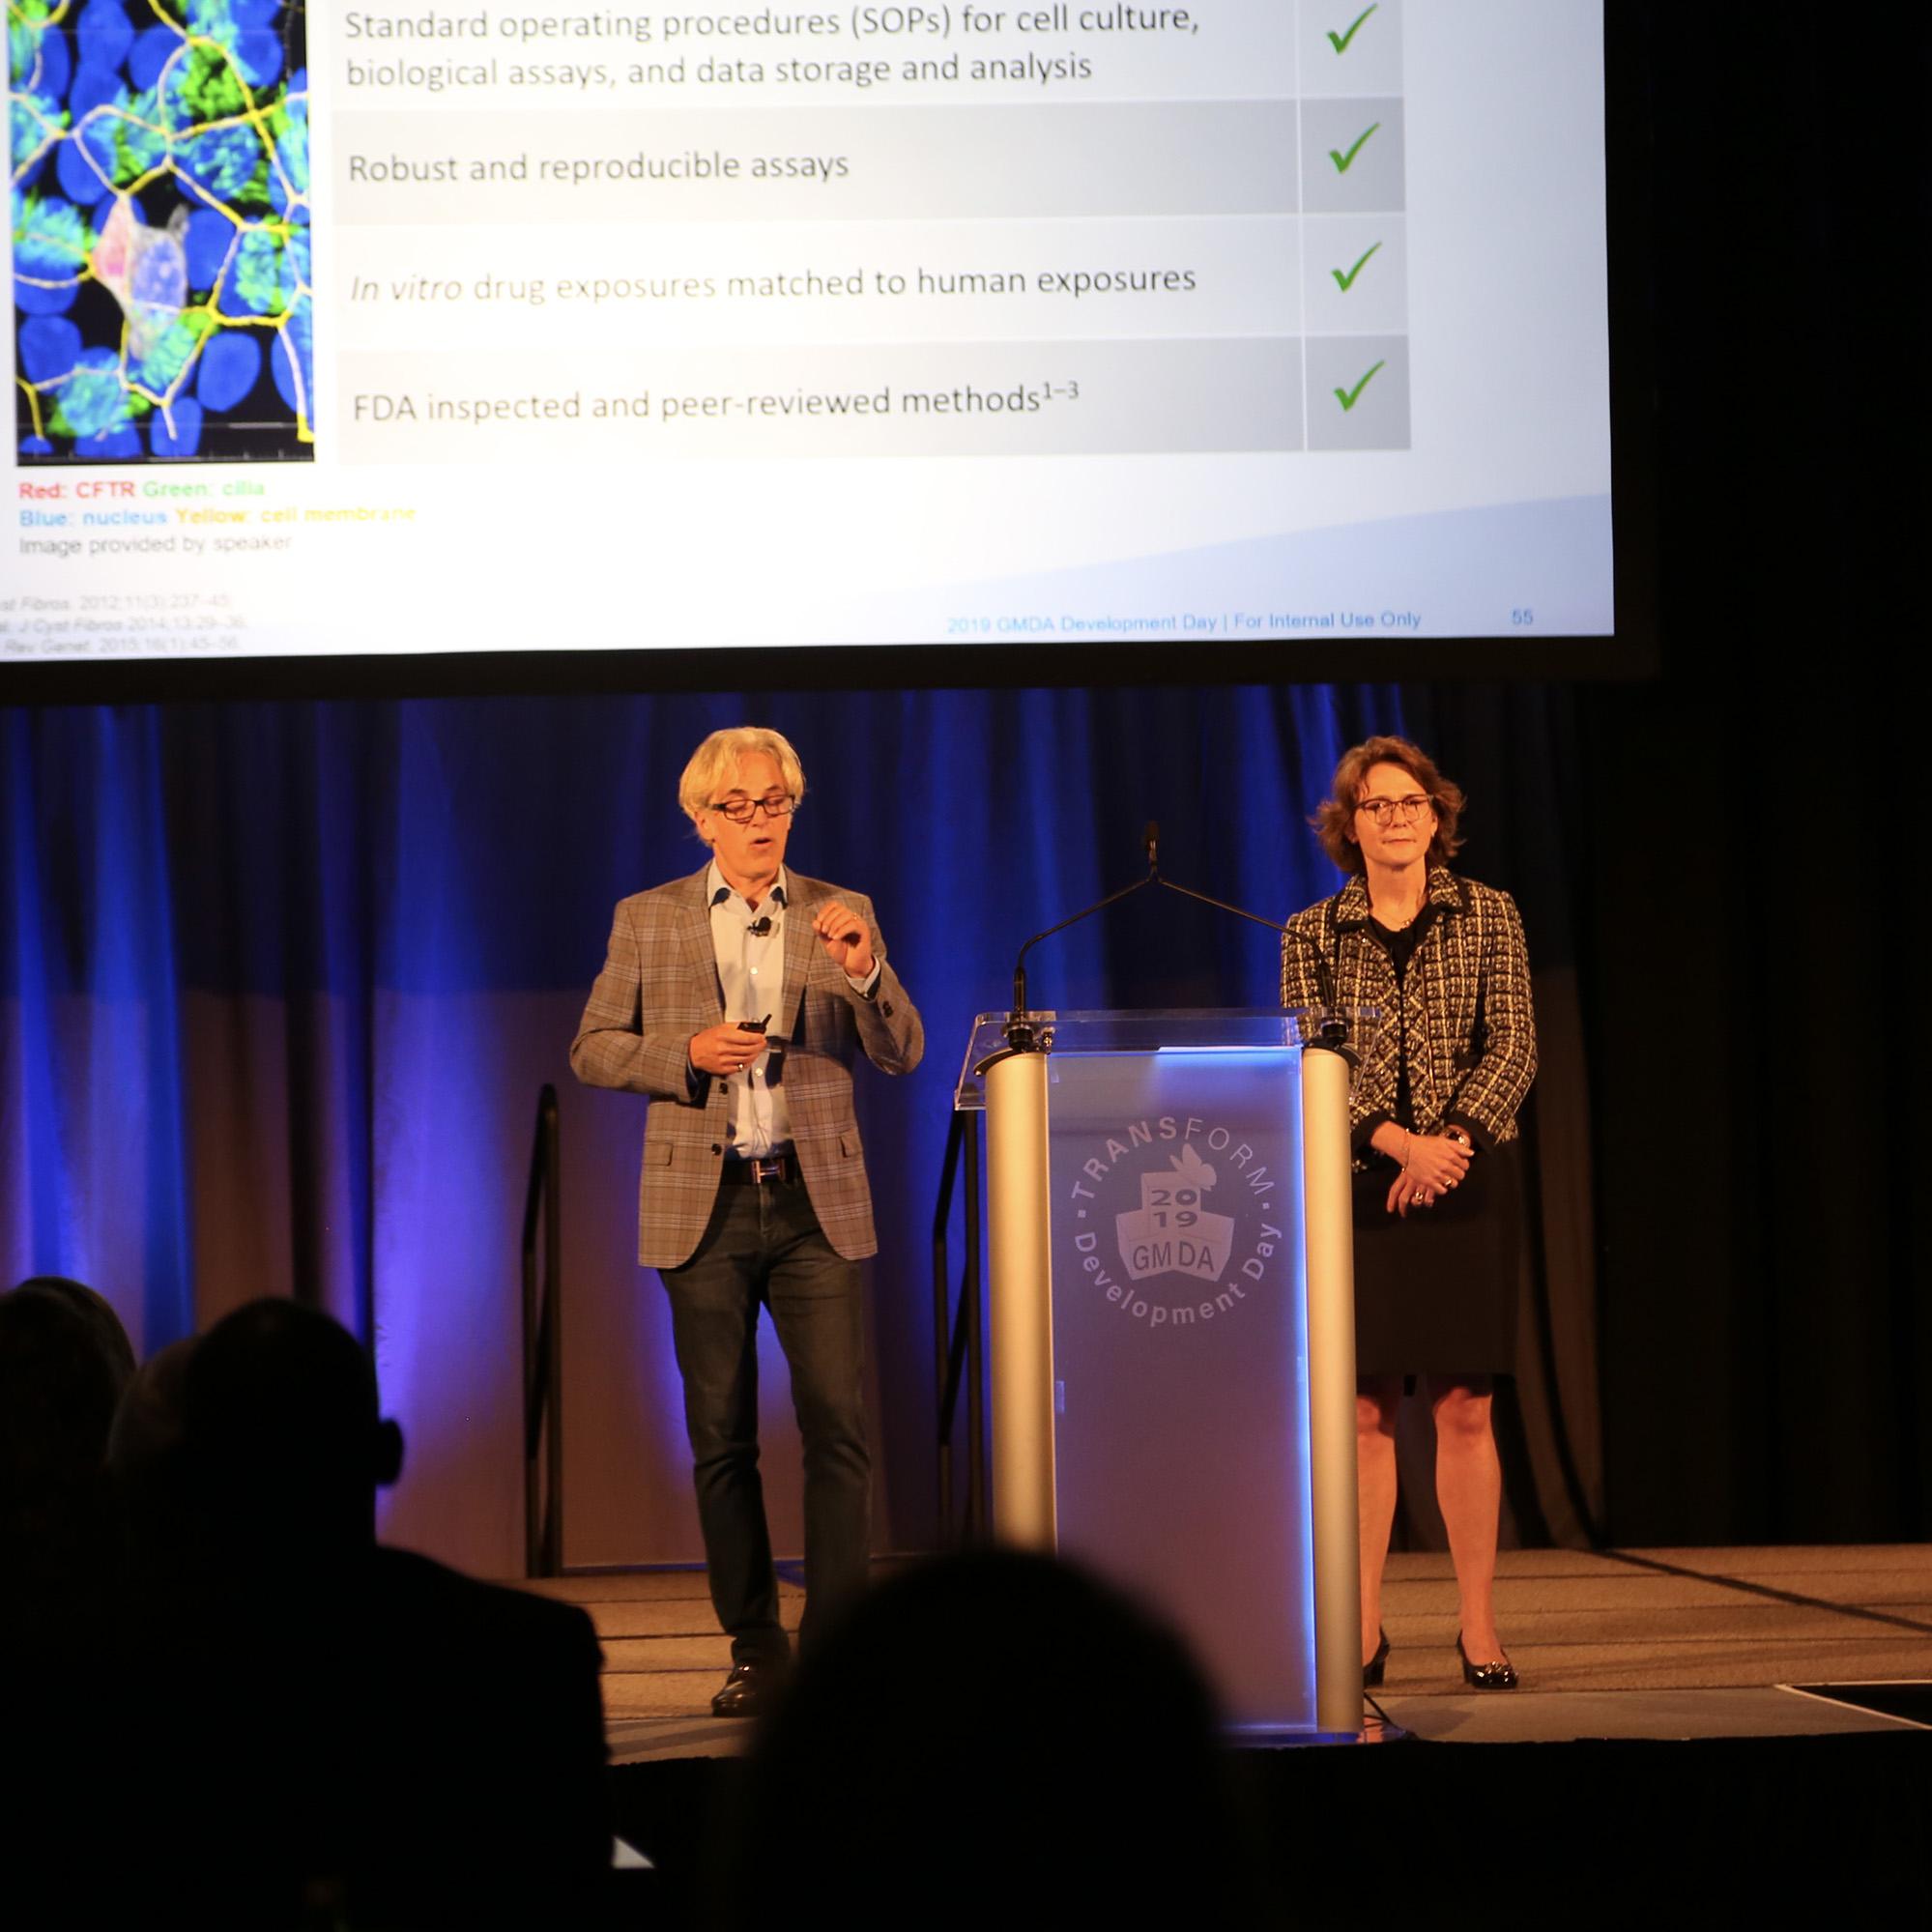 2 presenters on stage reviewing a scientific slide